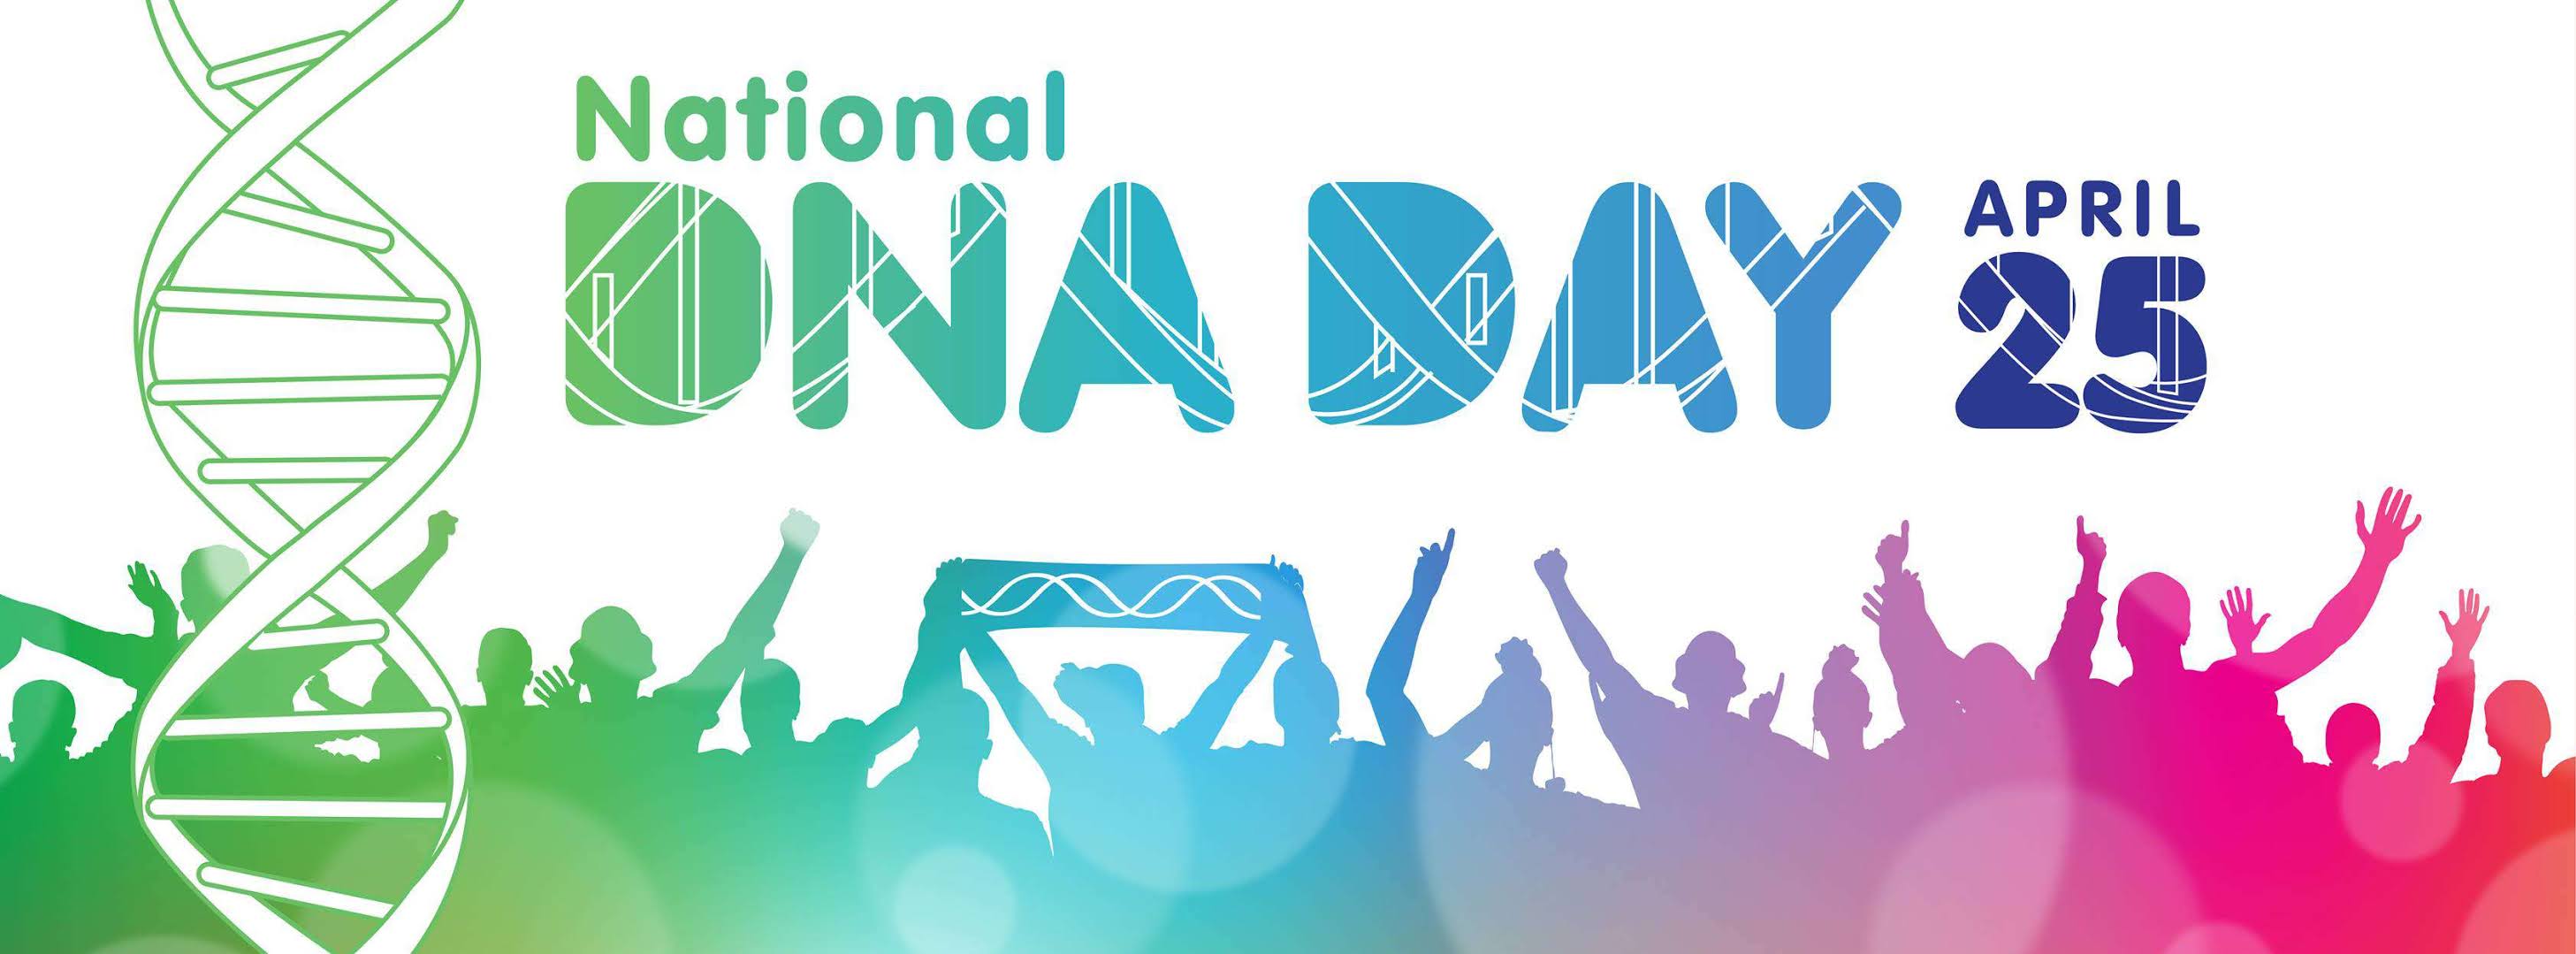 National DNA Day Wishes pics free download